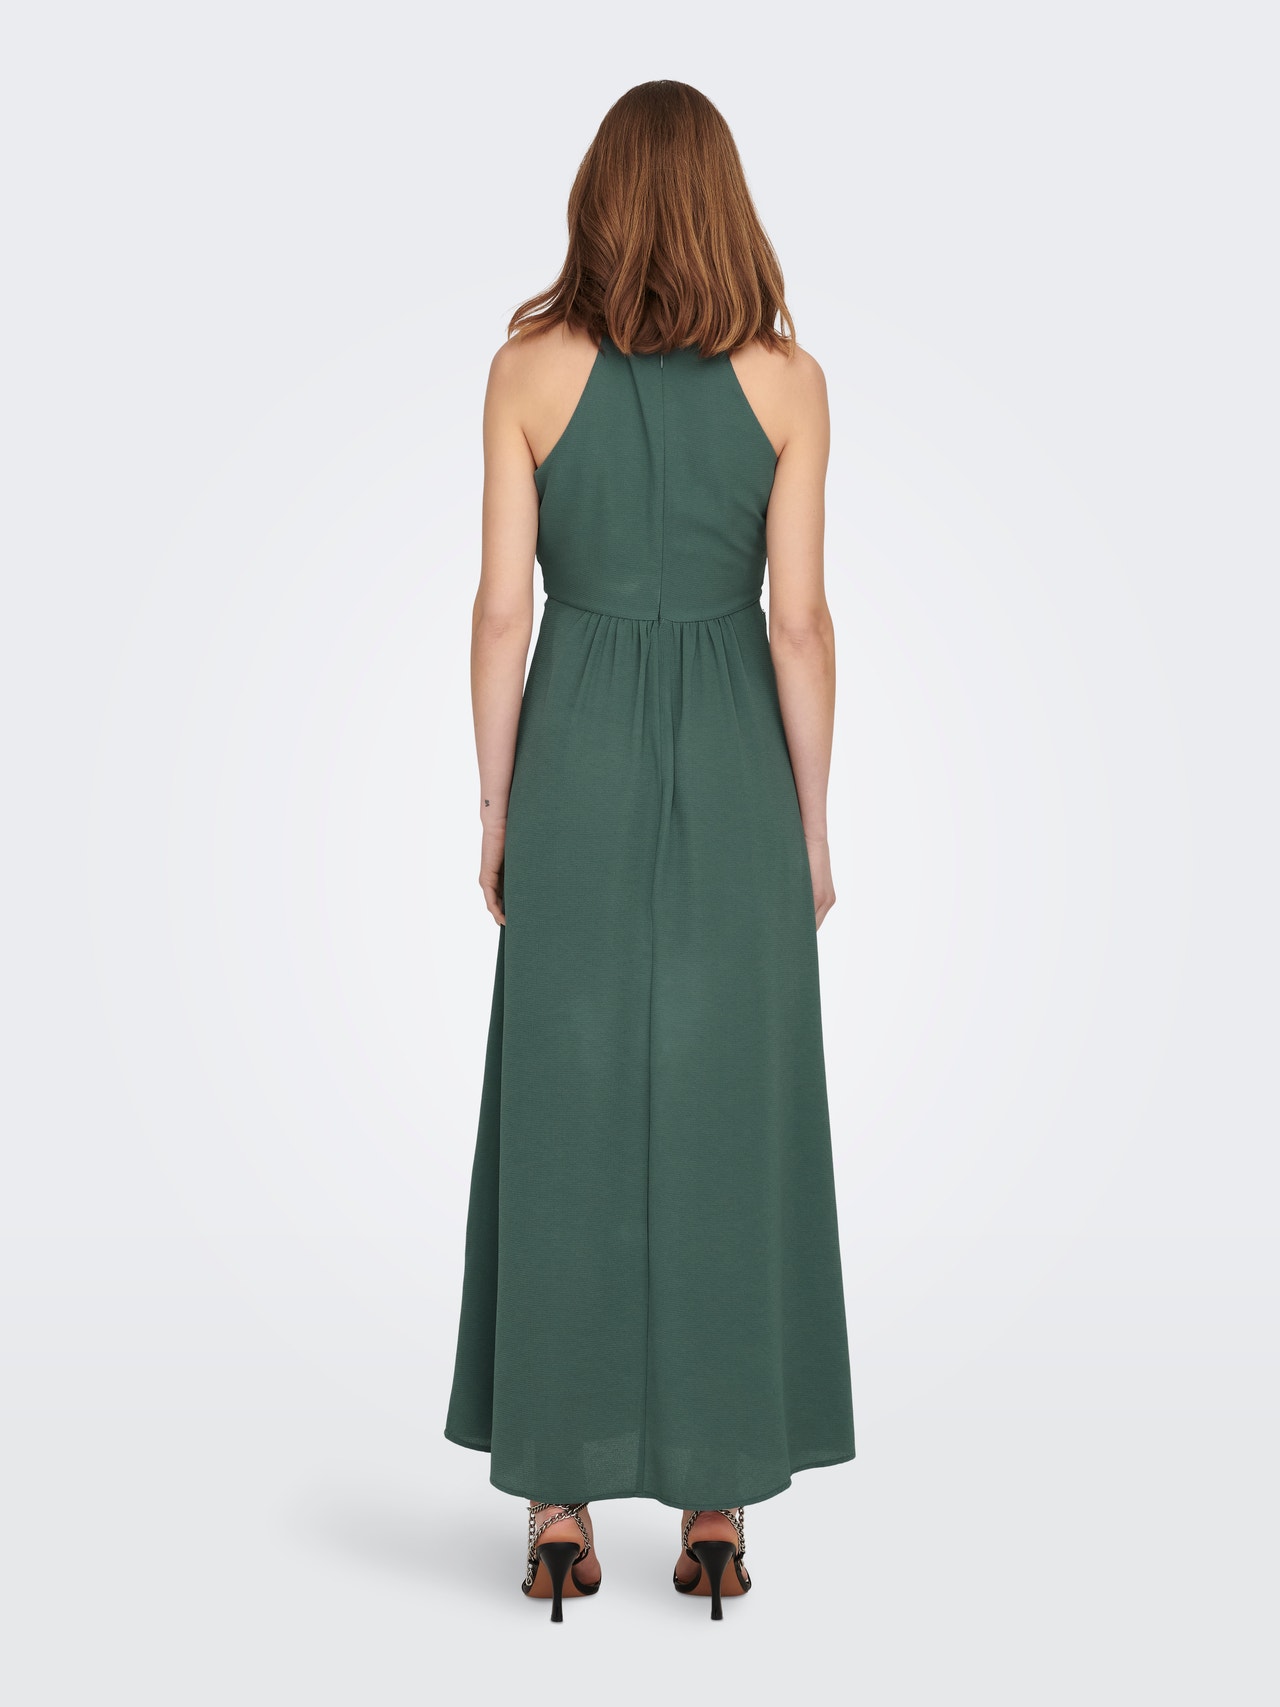 ONLY Relaxed Fit Halter neck Midi dress -Balsam Green - 15304689